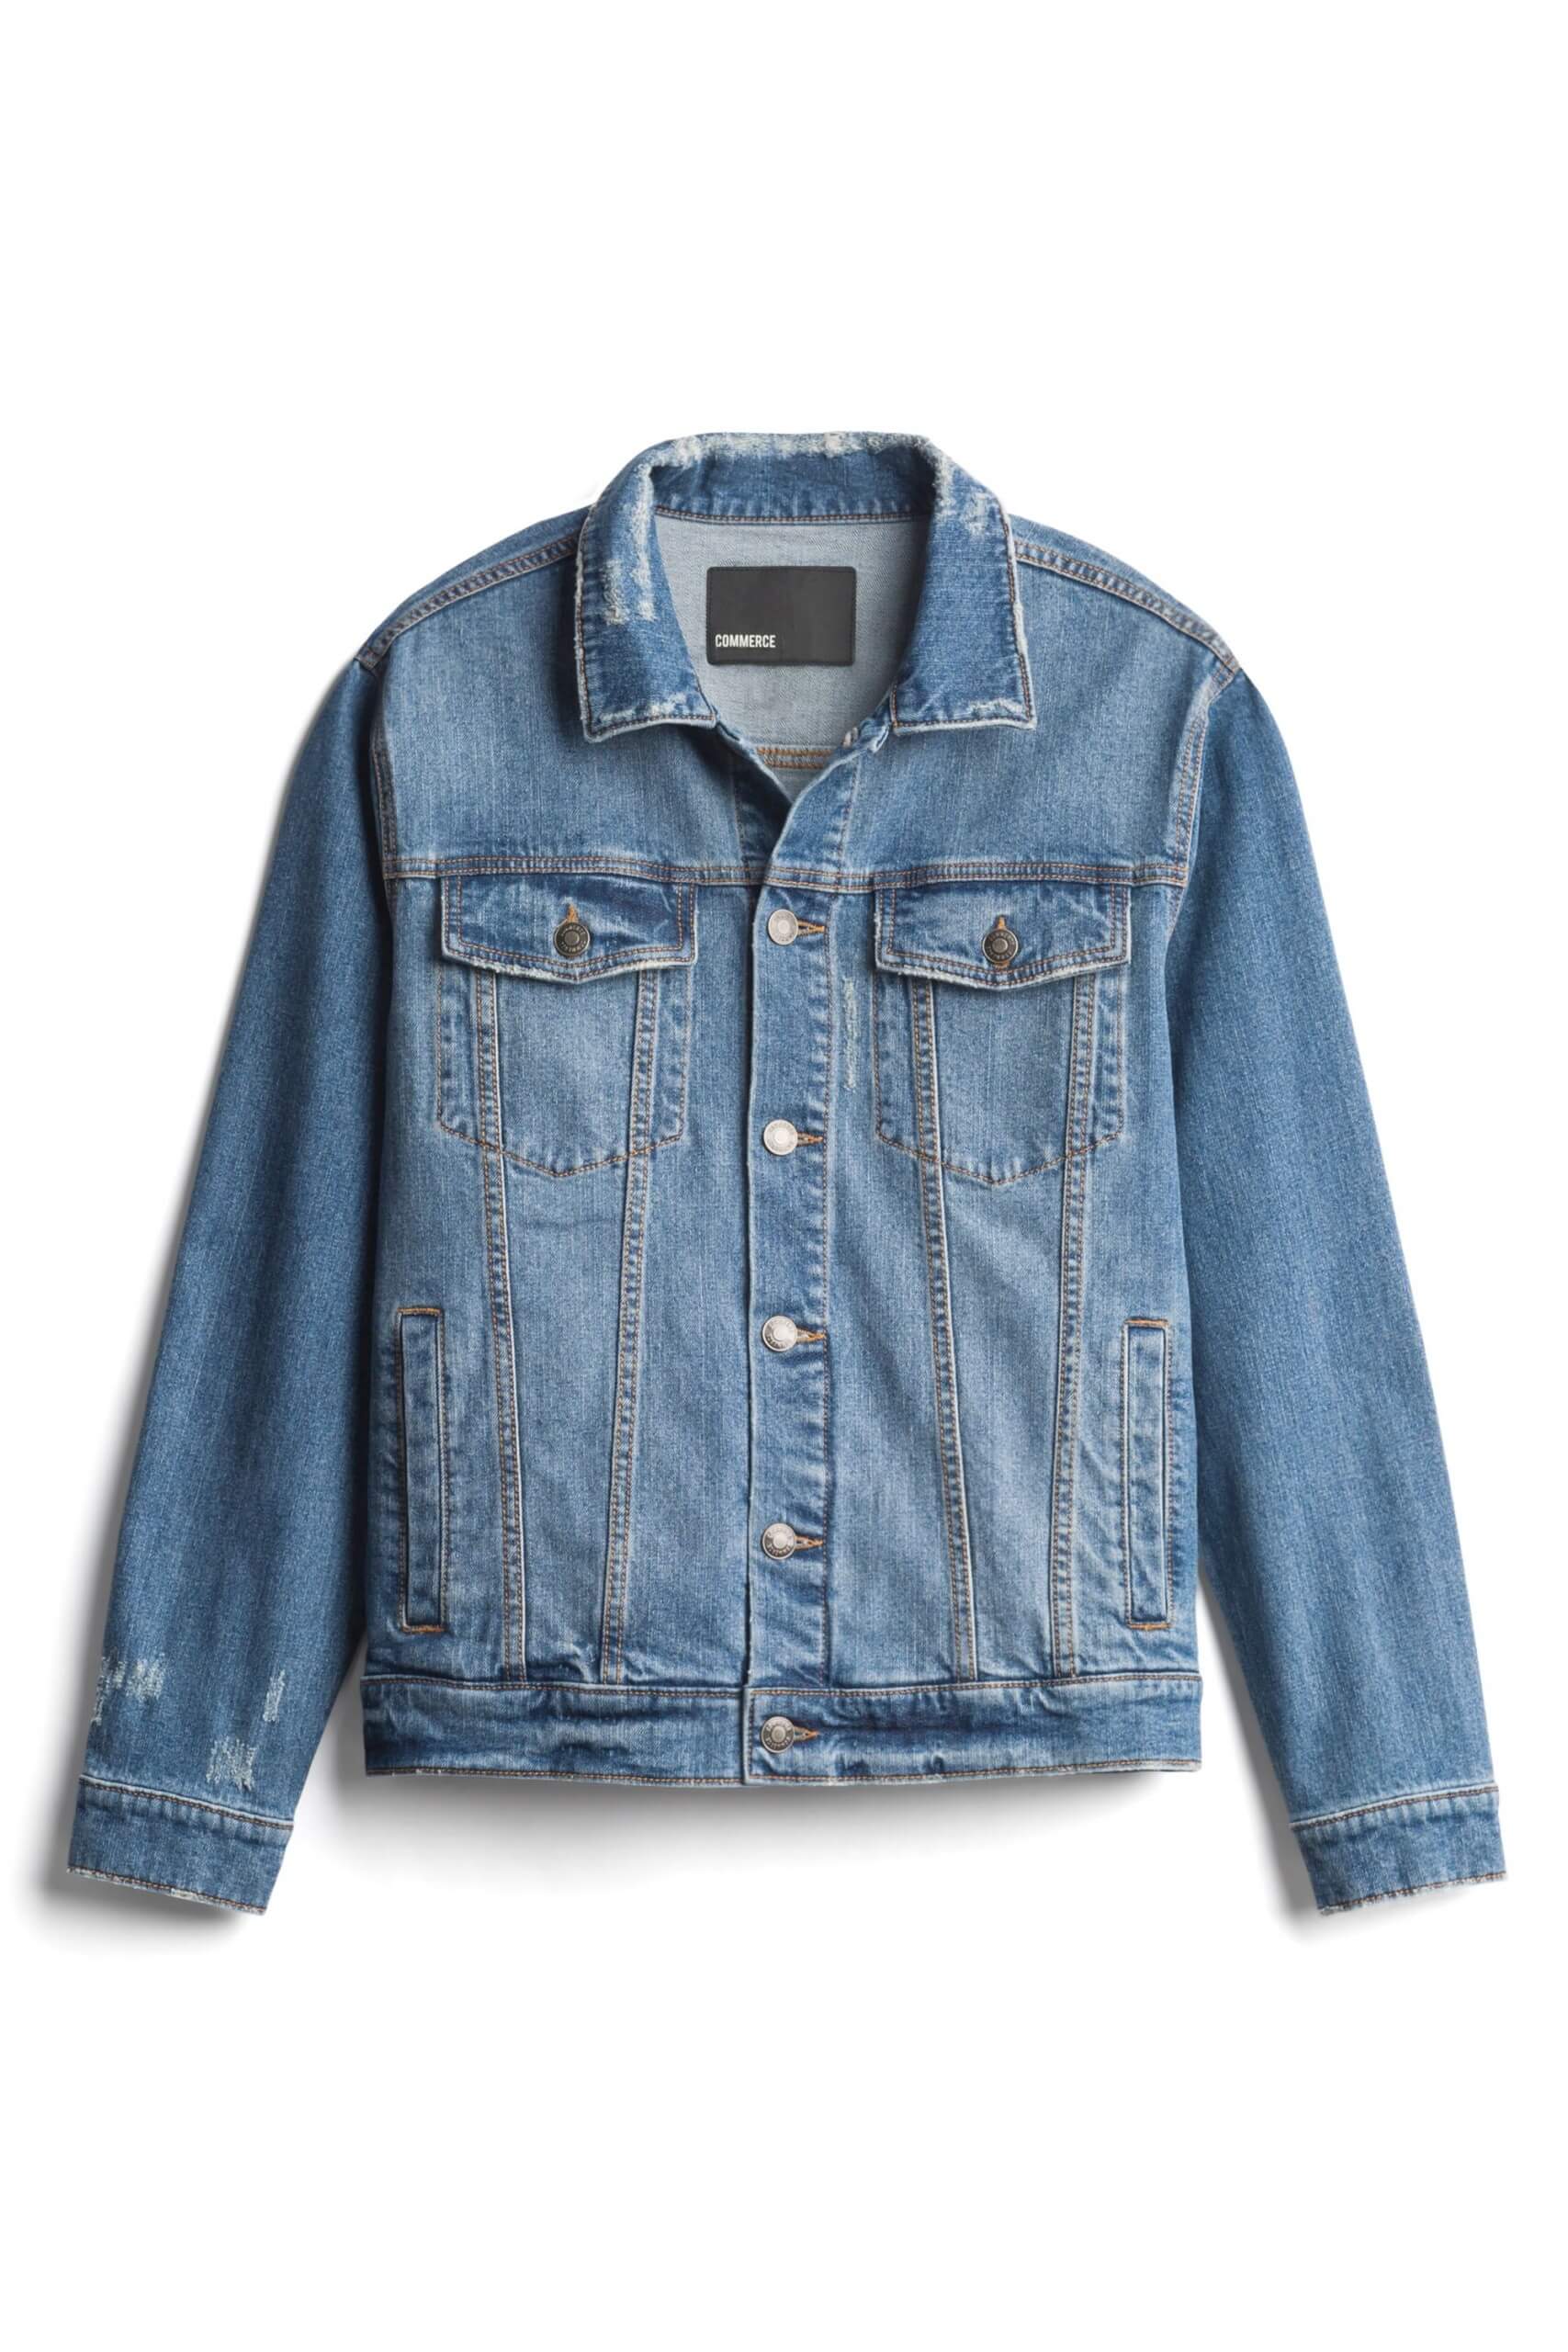 How to Wear a Jean Jacket, Personal Styling